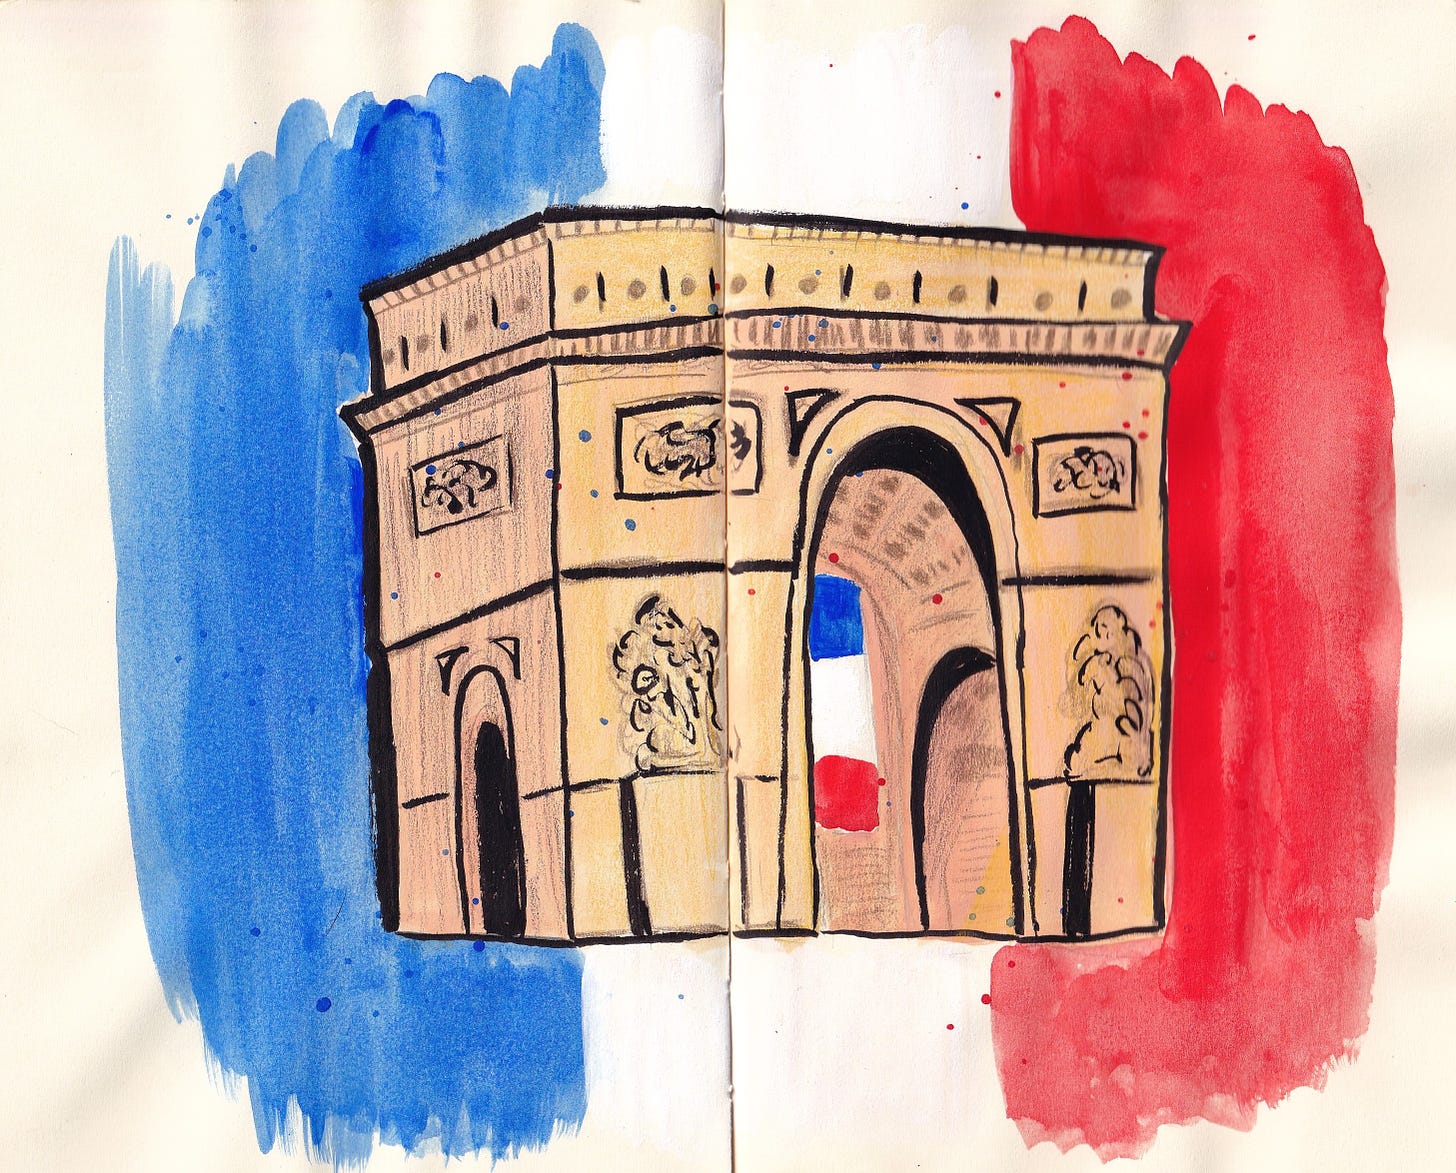 arc de triomphe illustration with french flag